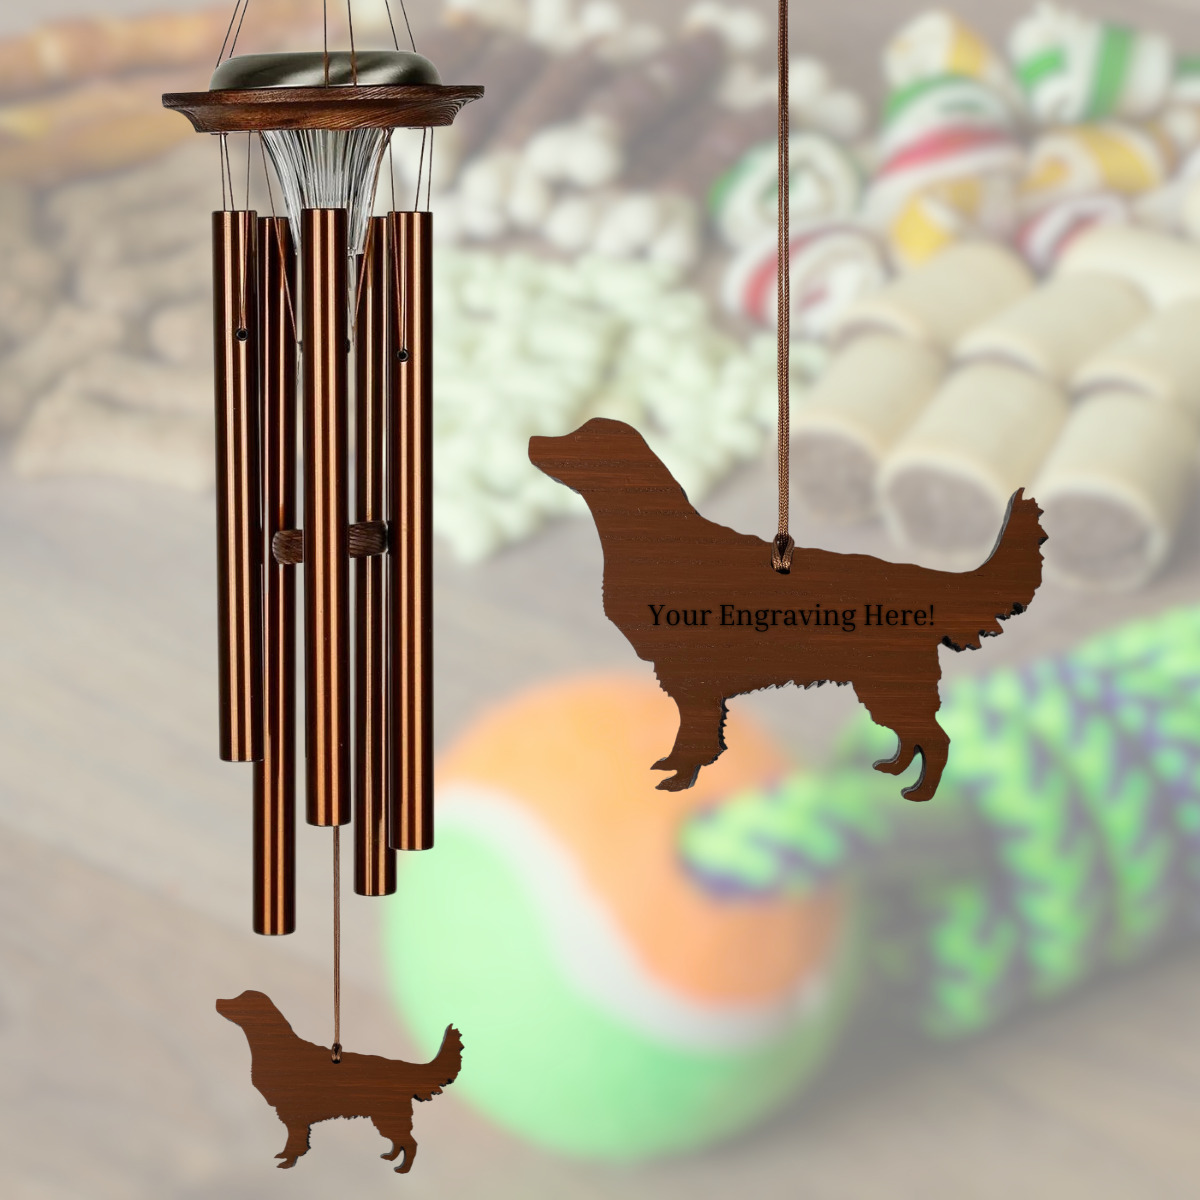 Moonlight Solar Chime 29 Inch Wind Chime - Engraveable Dog Sail - Bronze